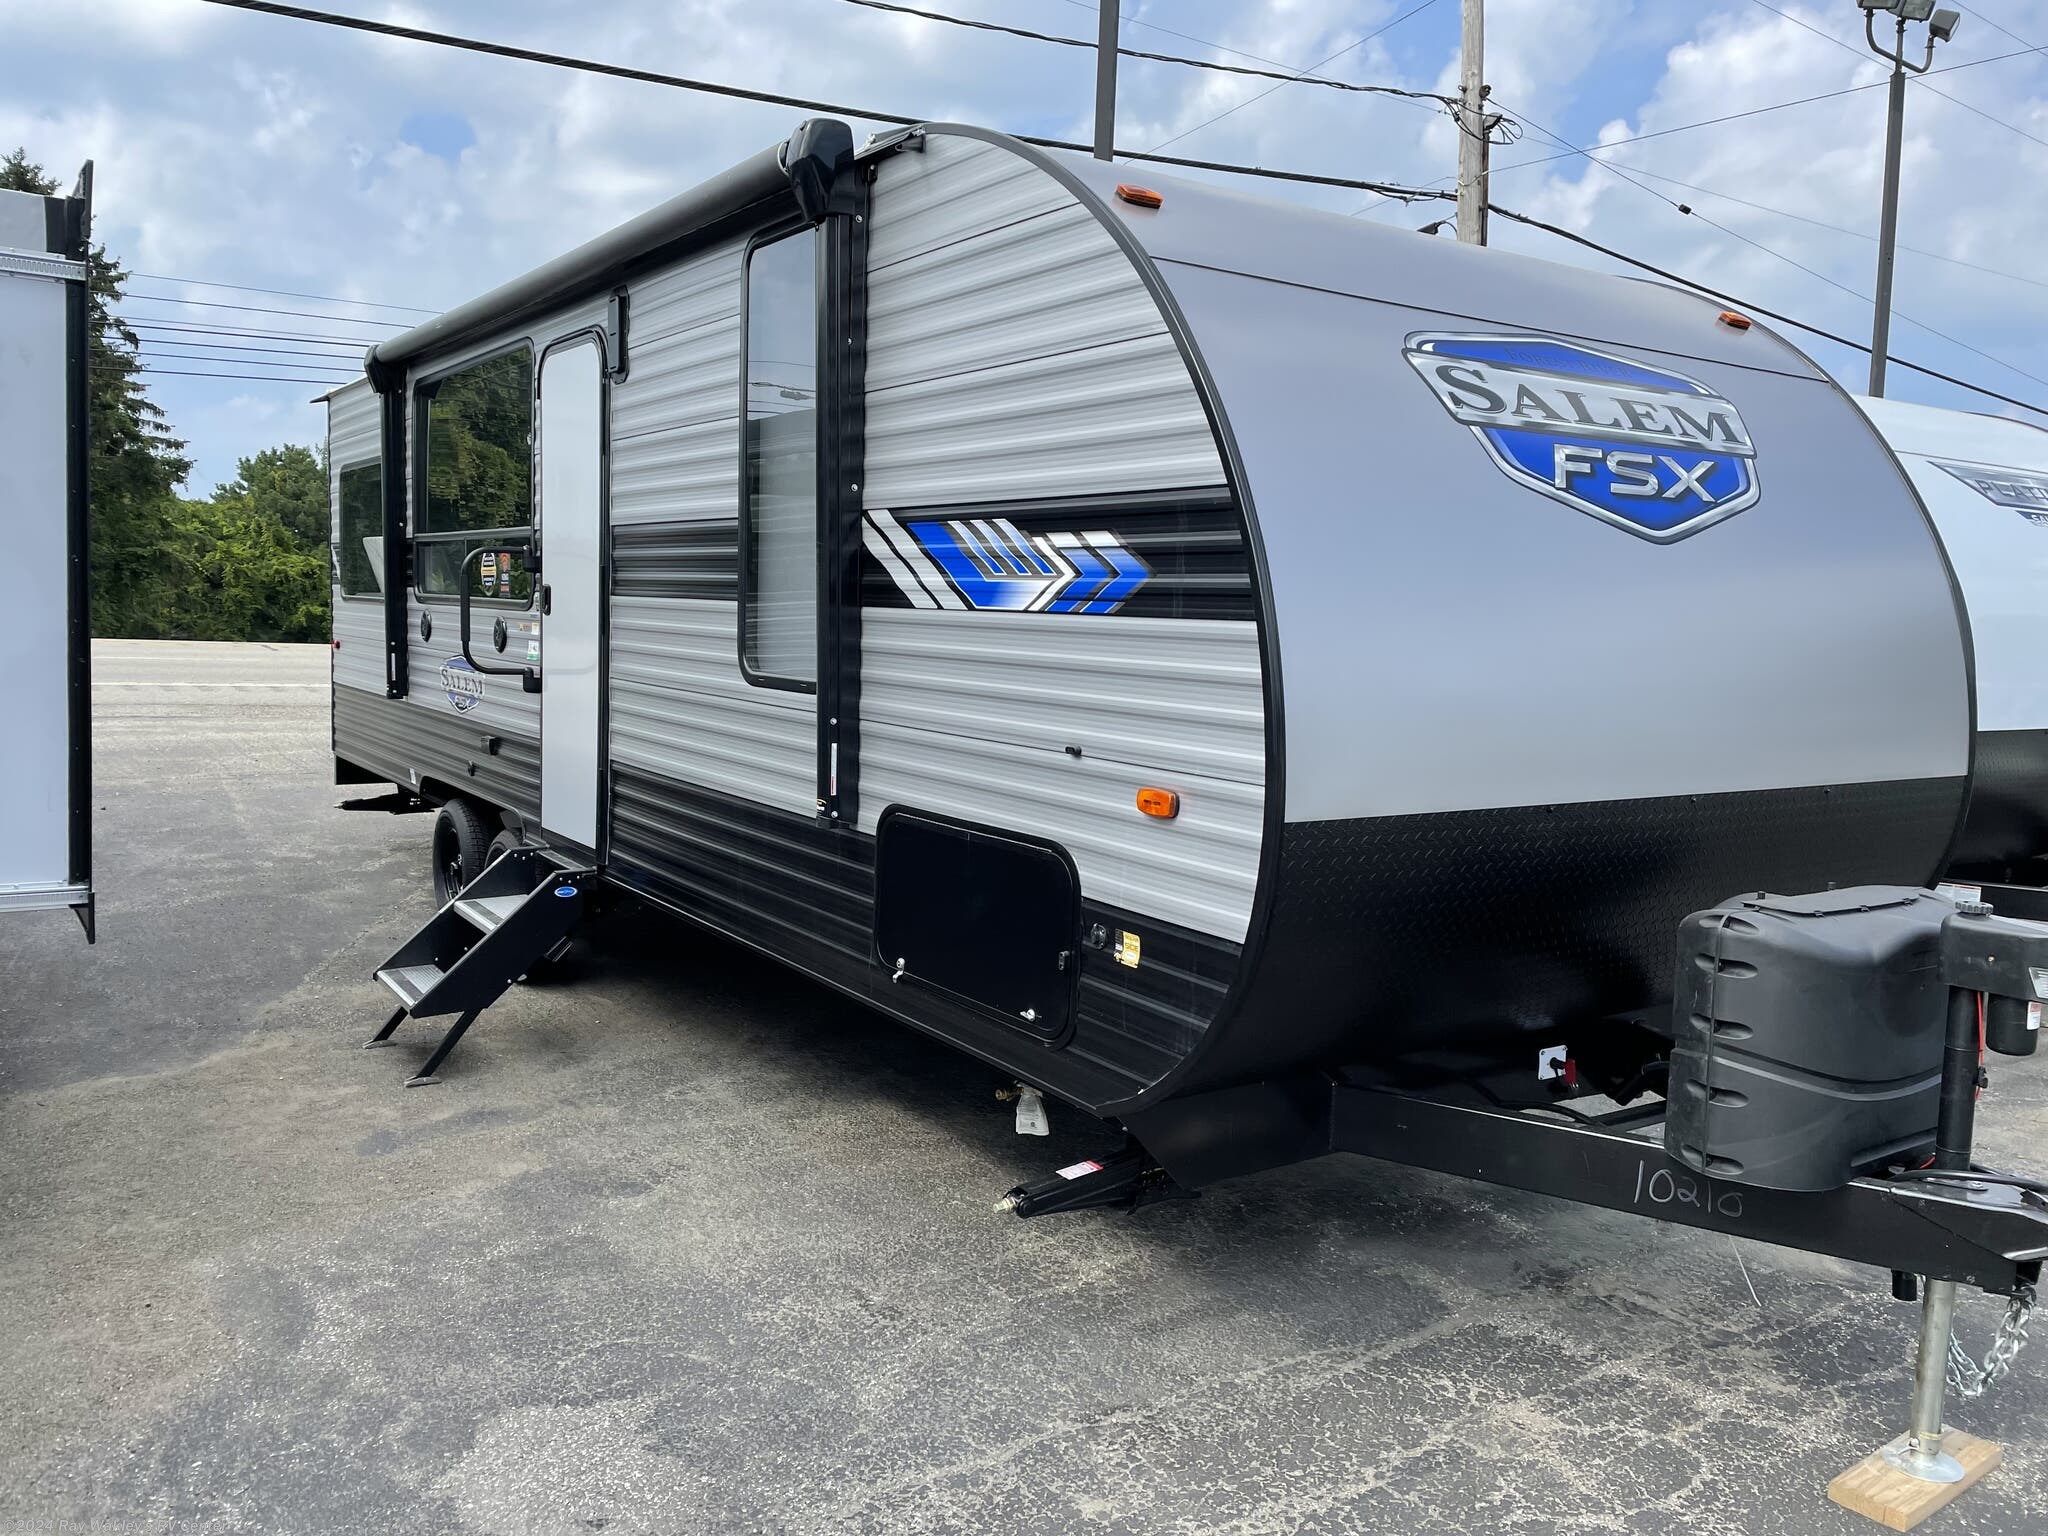 2021 Forest River Salem FSX 260RT RV for Sale in North East, PA 16428 | 10210 | RVUSA.com 2021 Forest River Rv Salem Fsx 260rt